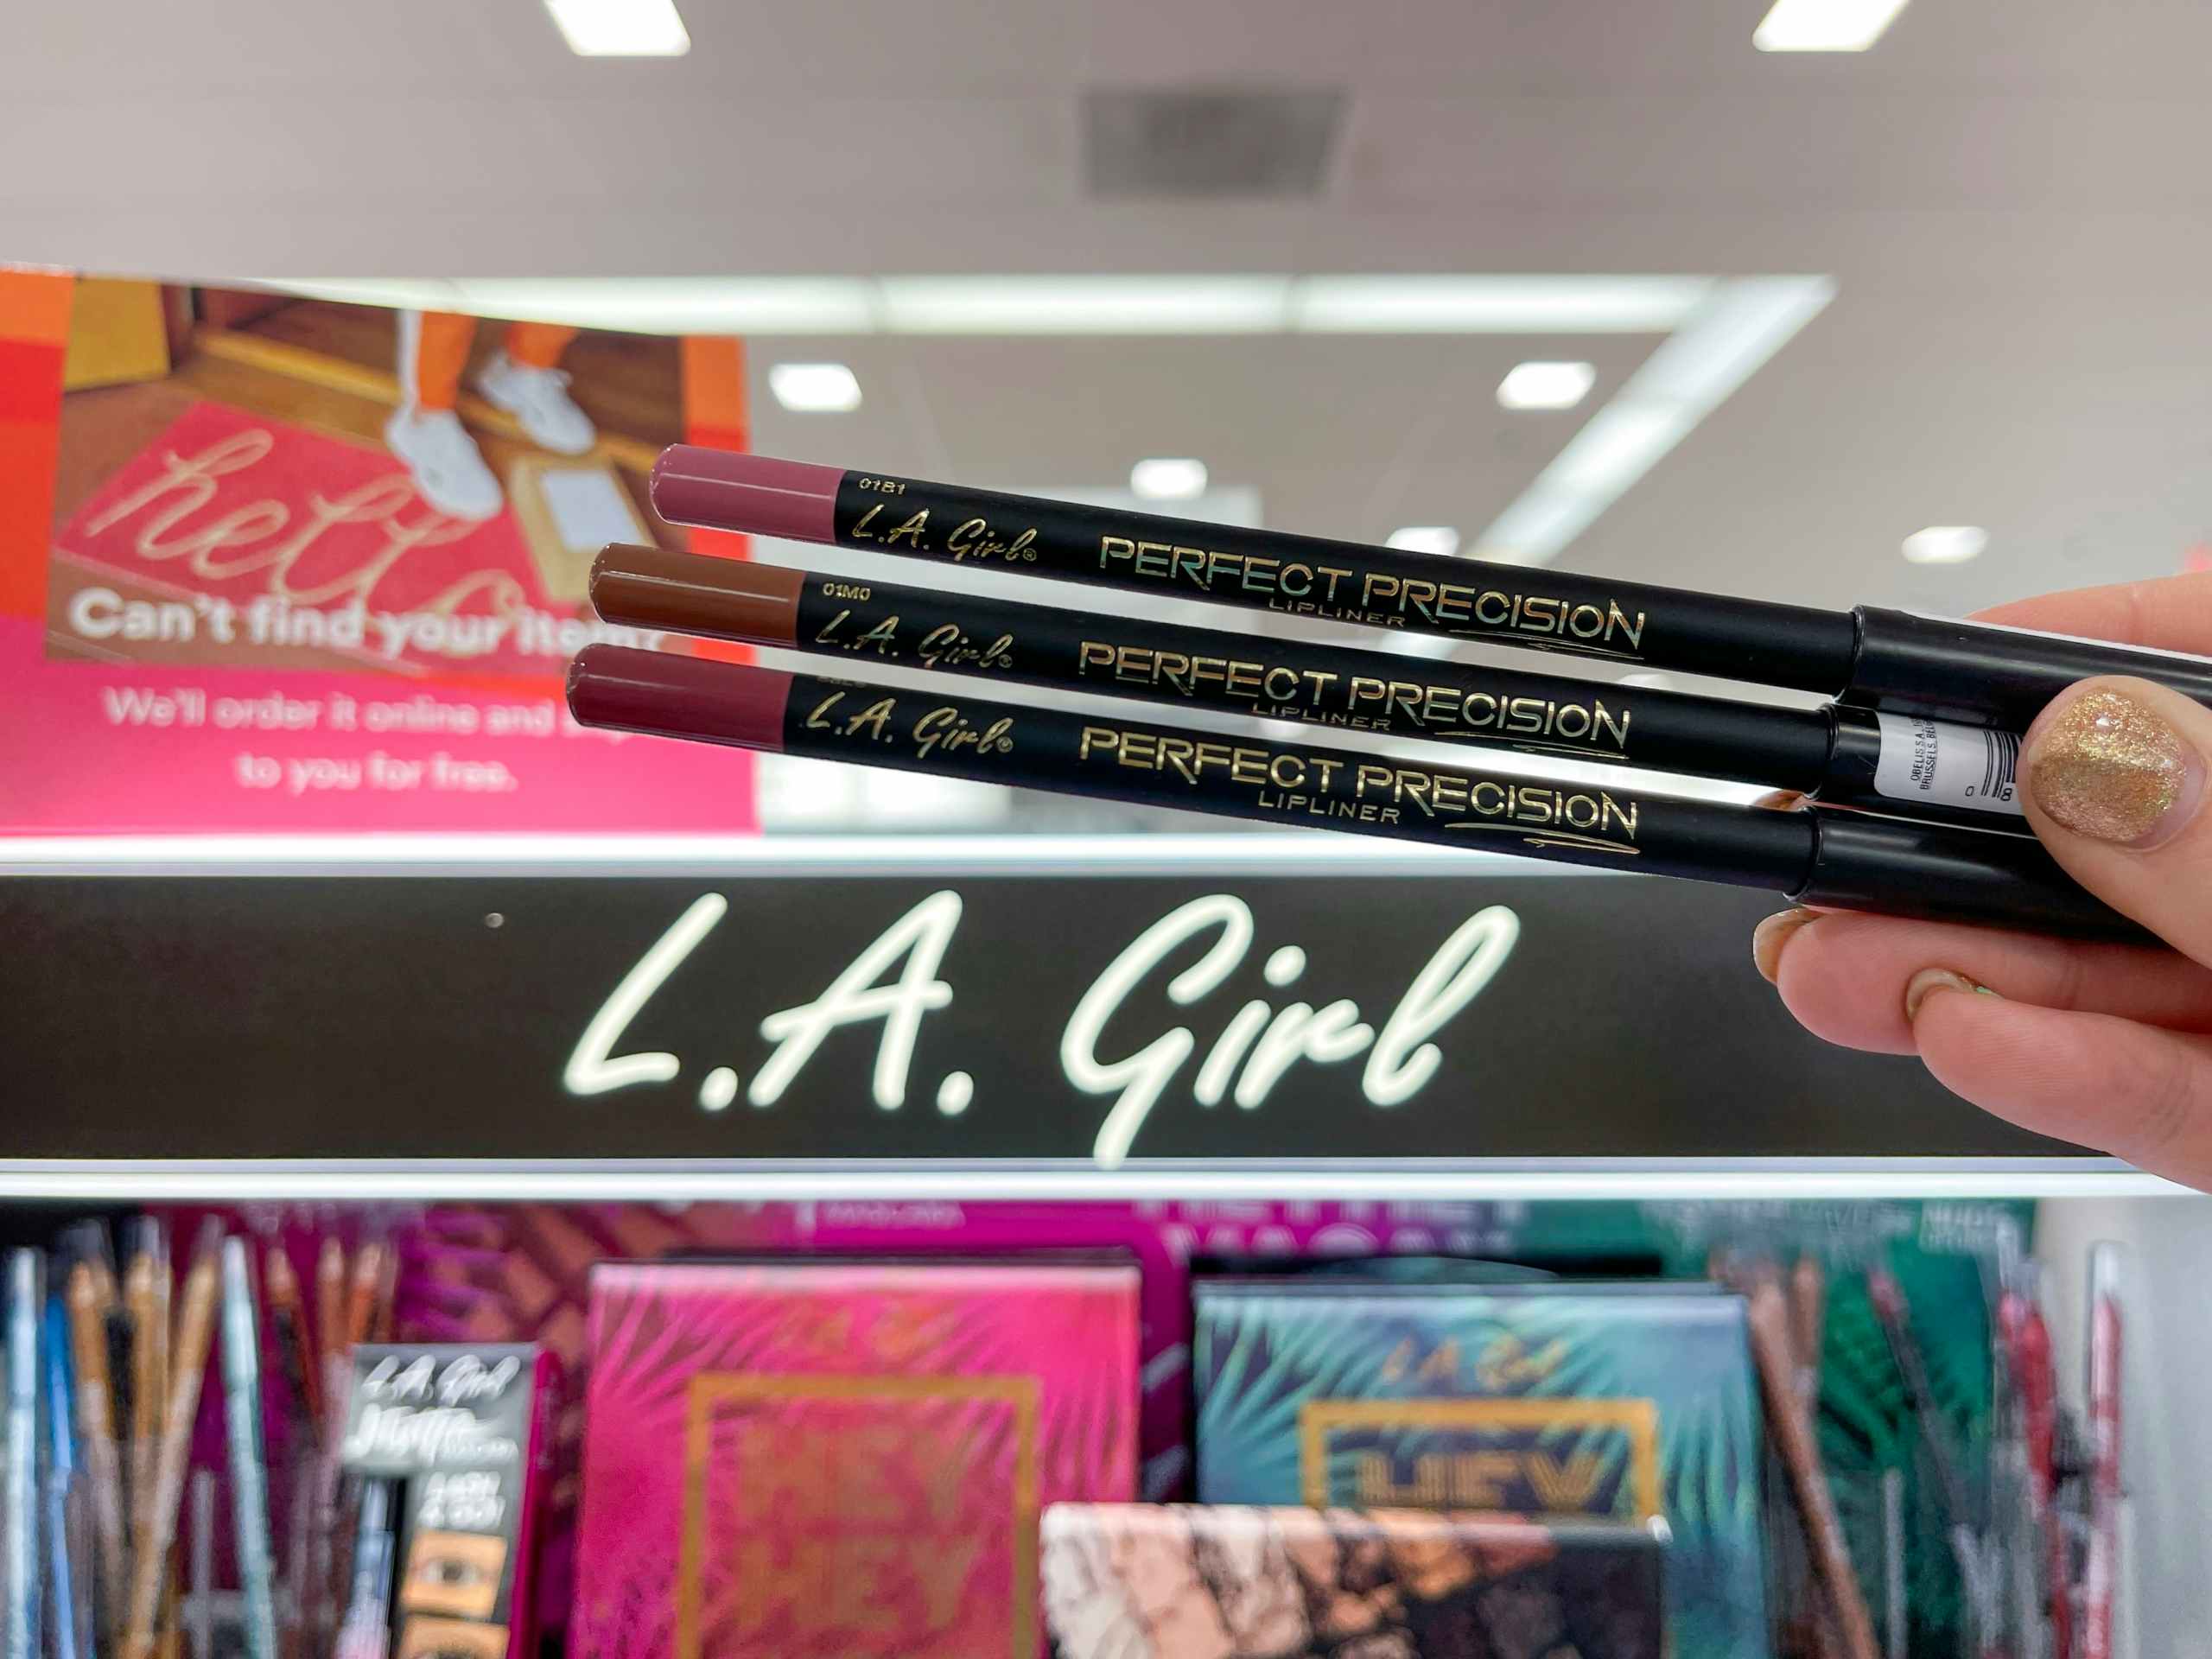 hand holding L.A. Girl lip liners in front of display